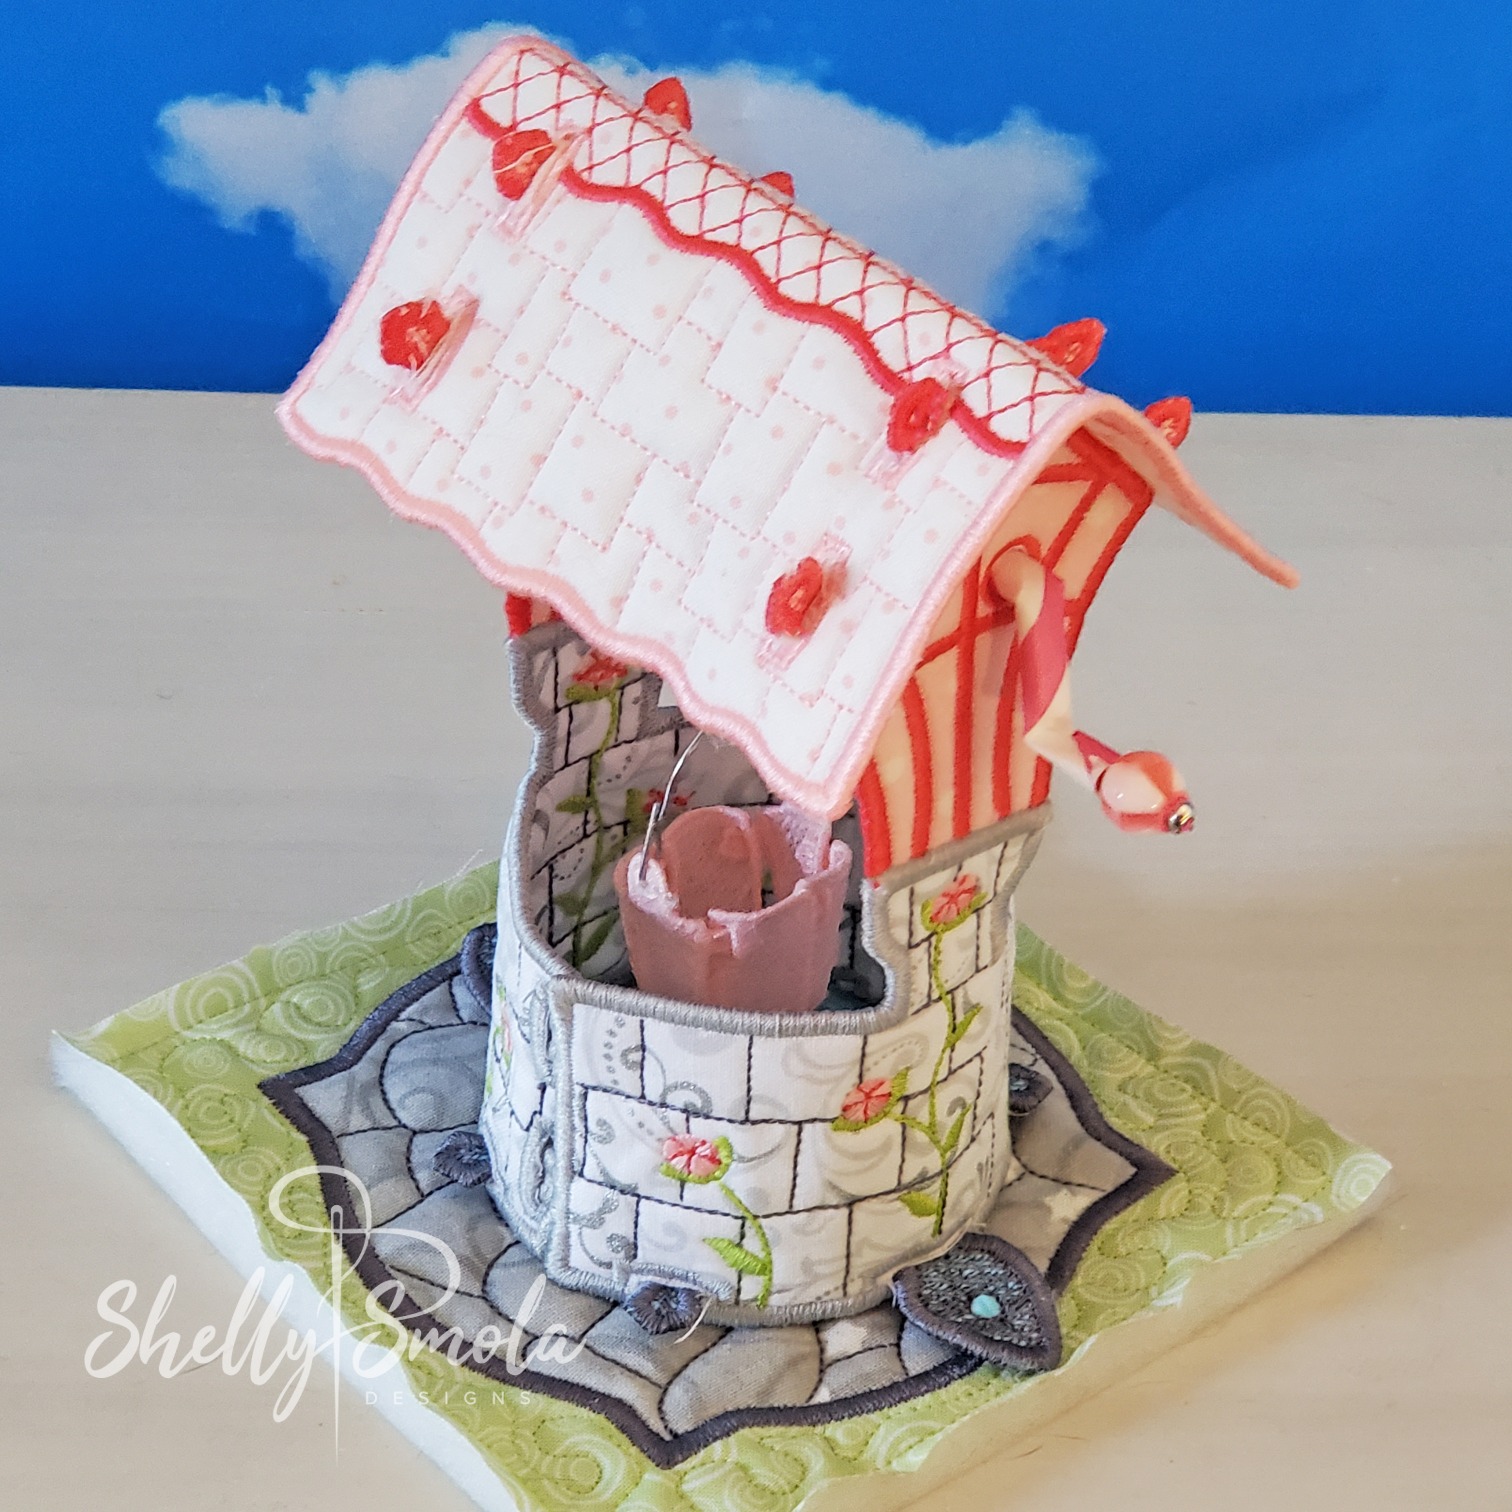 Once Upon a Time Wishing Well by Shelly Smola